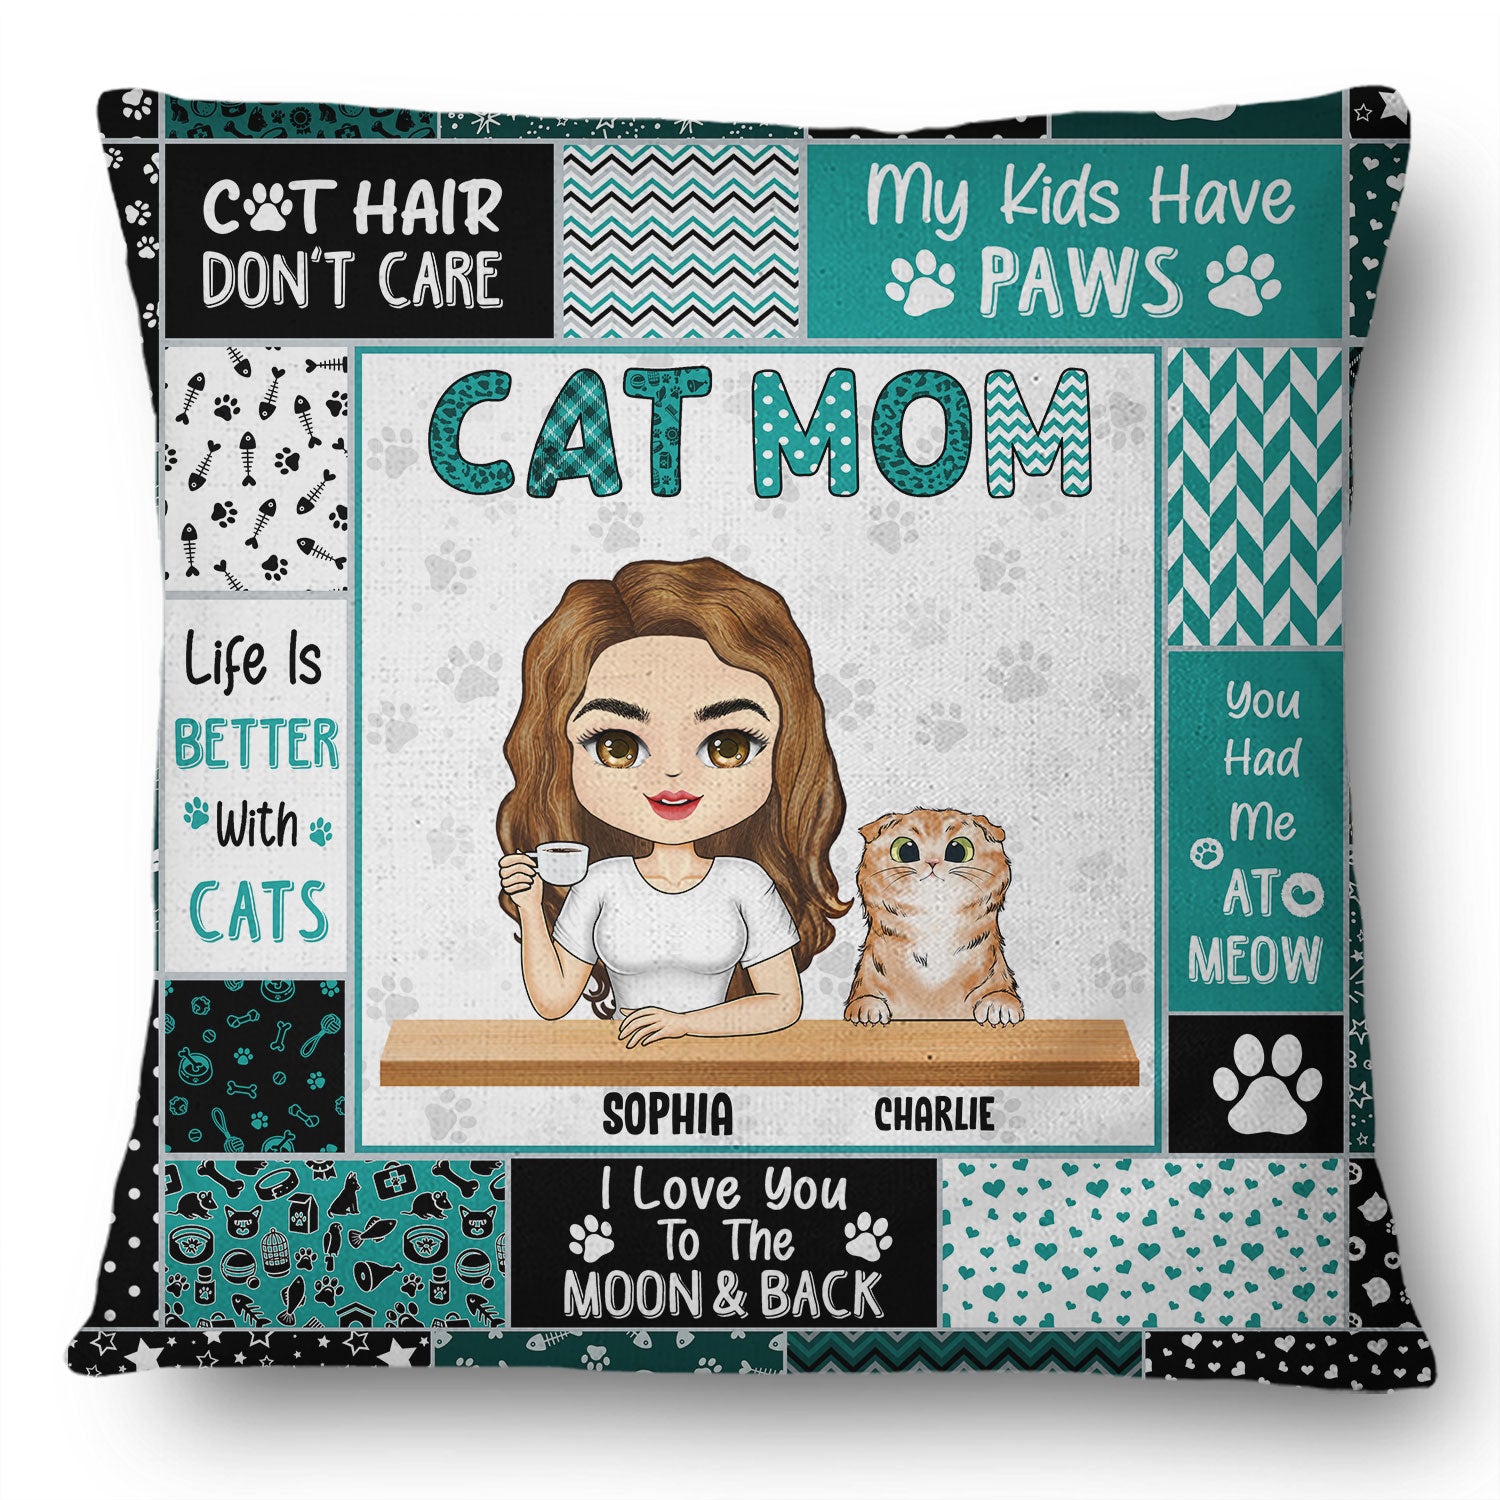 Cat Mom, Cat Dad - Birthday, Loving, Funny, Home Decor Gift For Cat Lover, Pet Owner - Personalized Custom Pillow